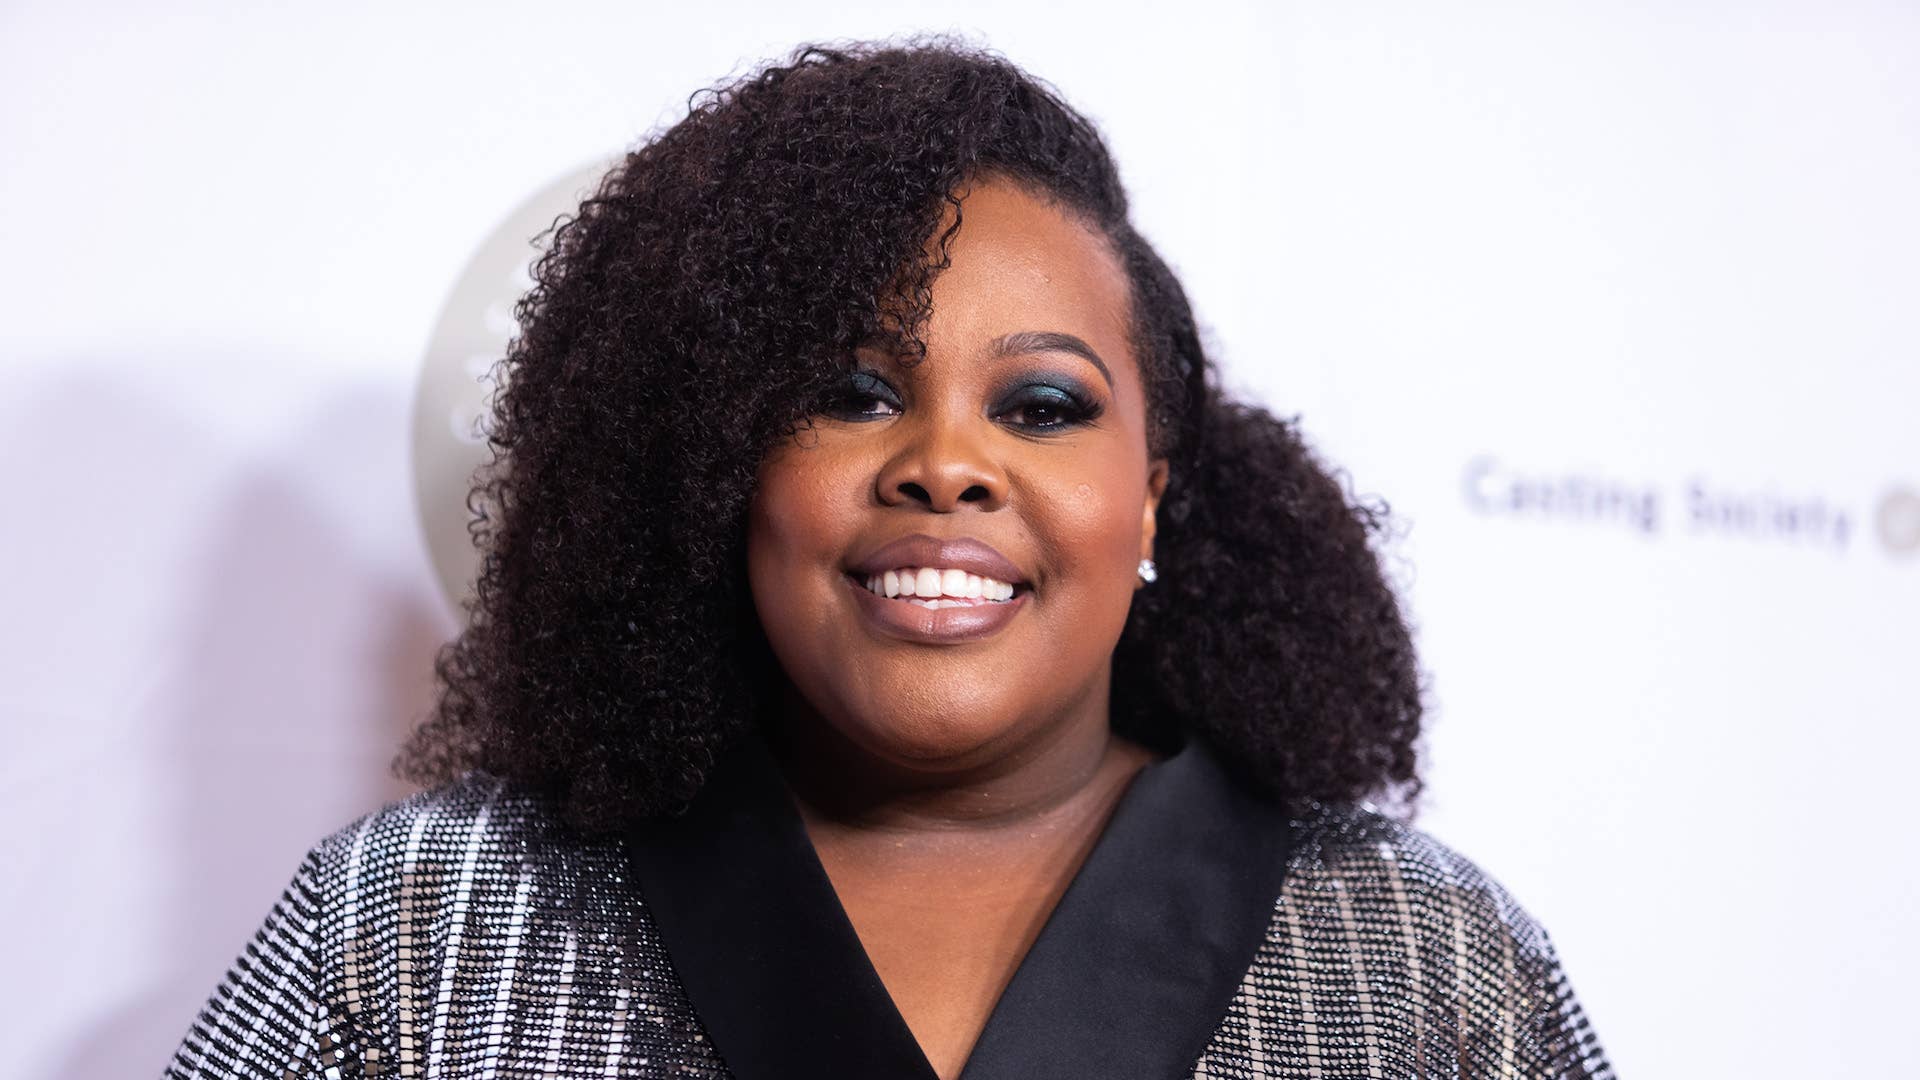 Amber Riley attends The Casting Society of America's 34th Annual Artios Awards.